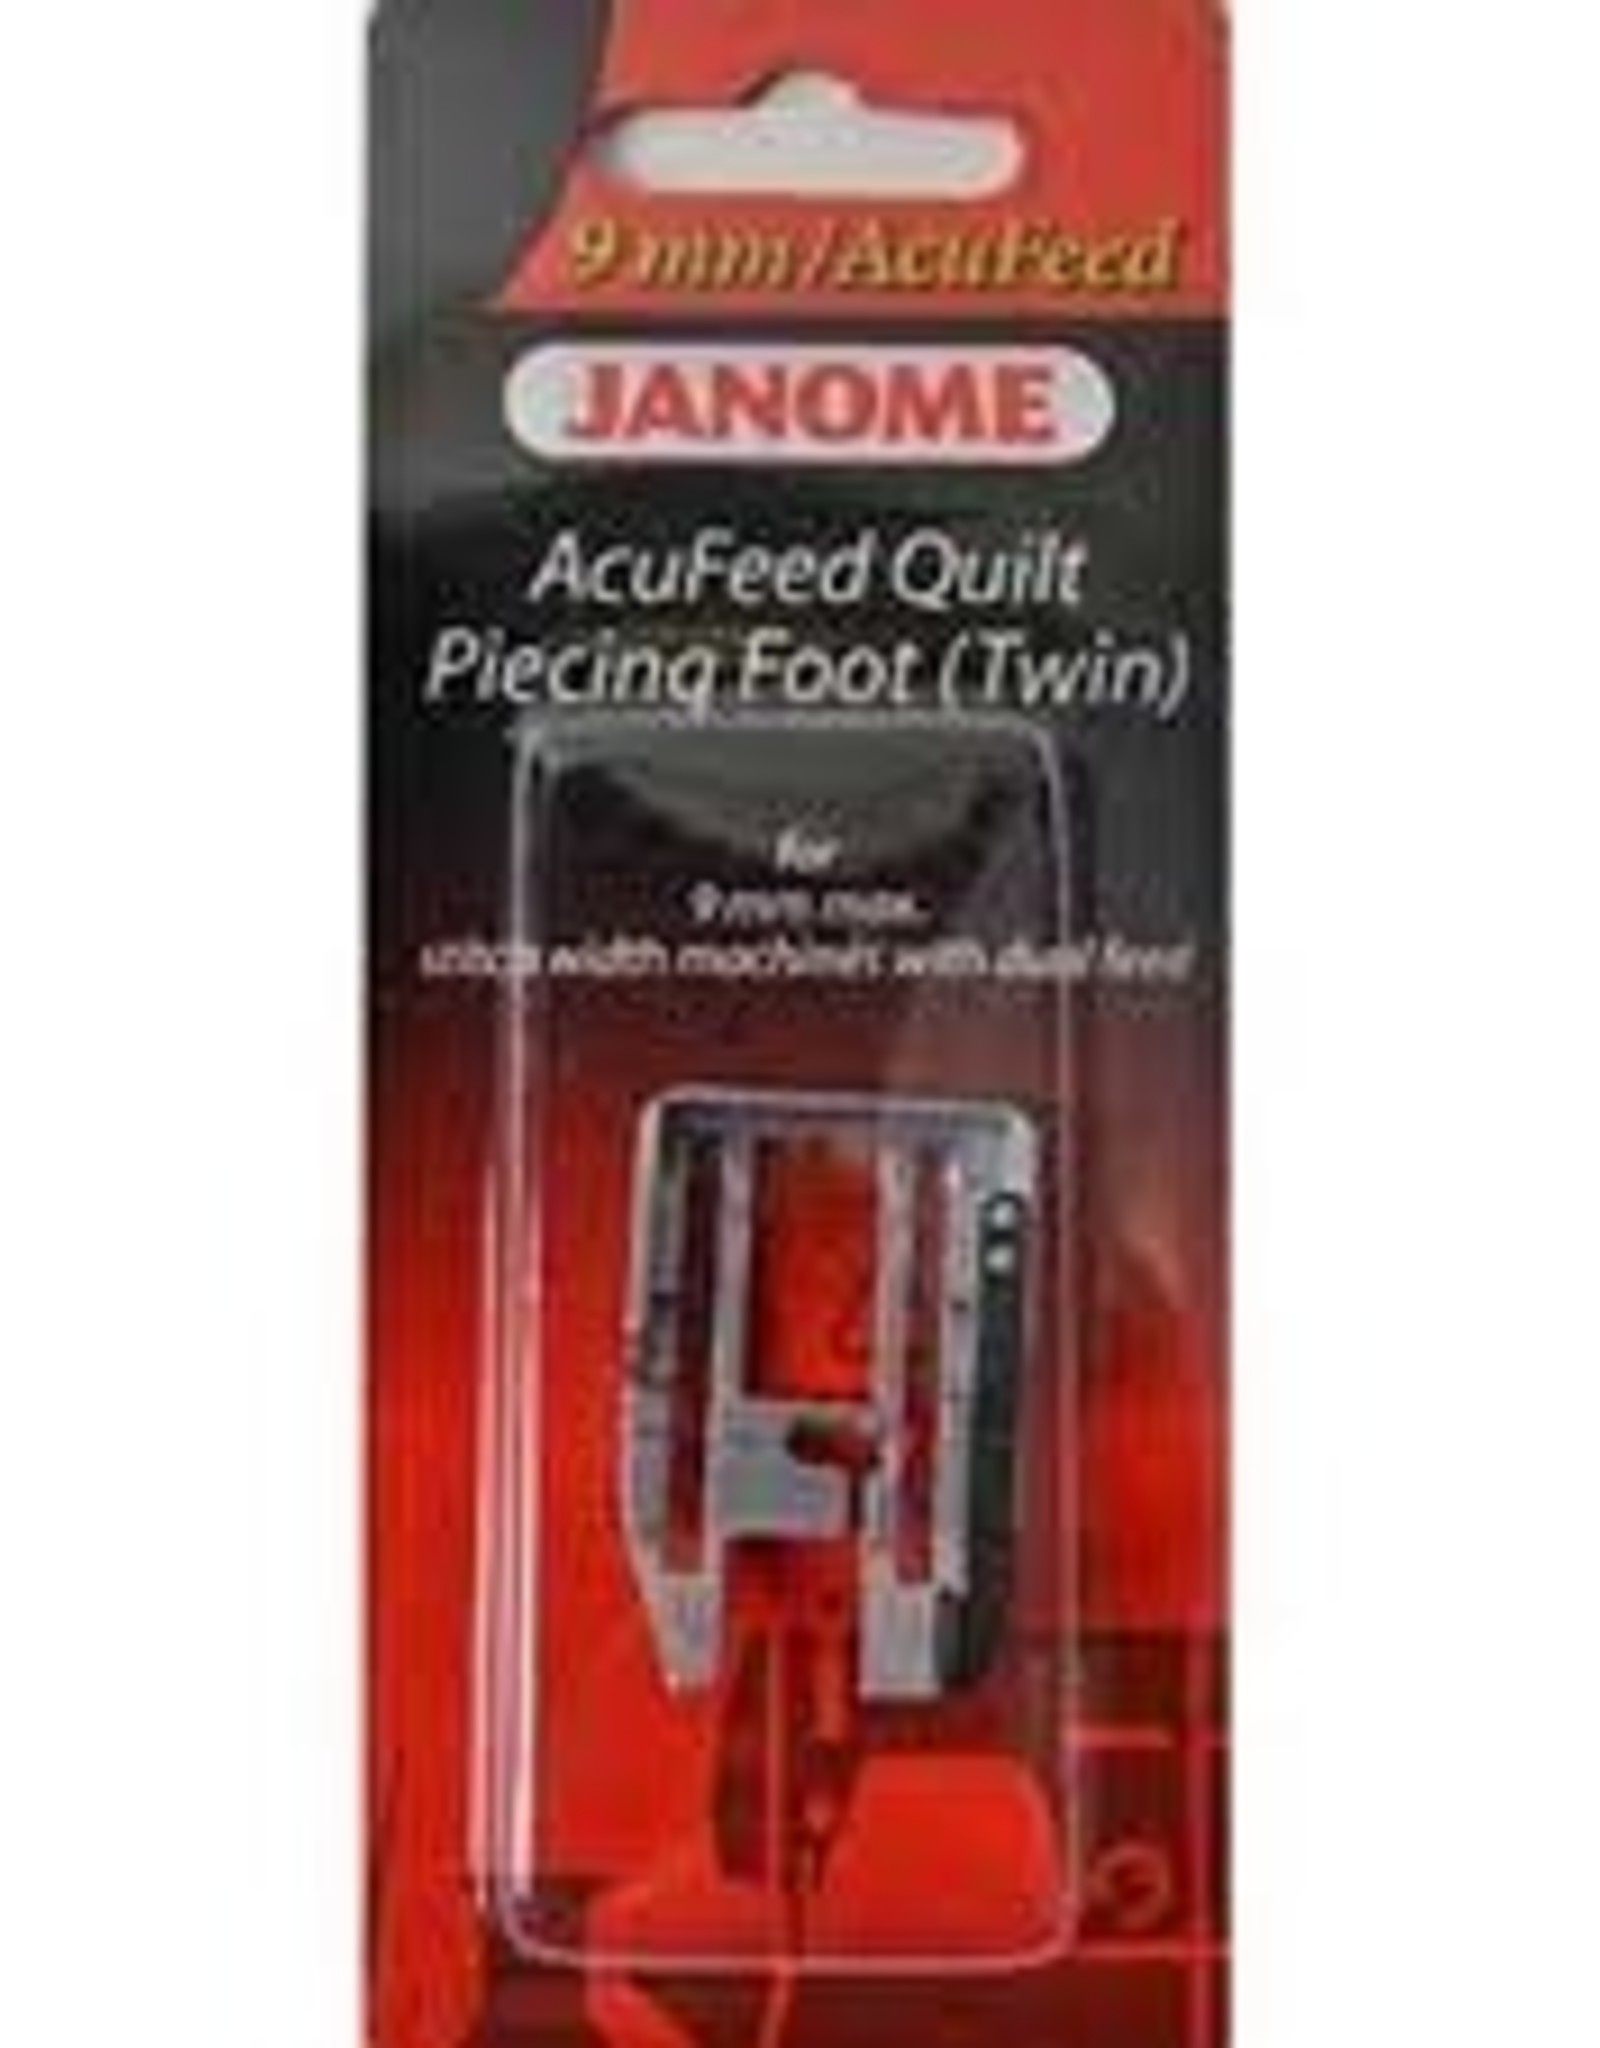 Janome AcuFeed Quilt Piecing 1/4" Foot (Twin) - 202125004